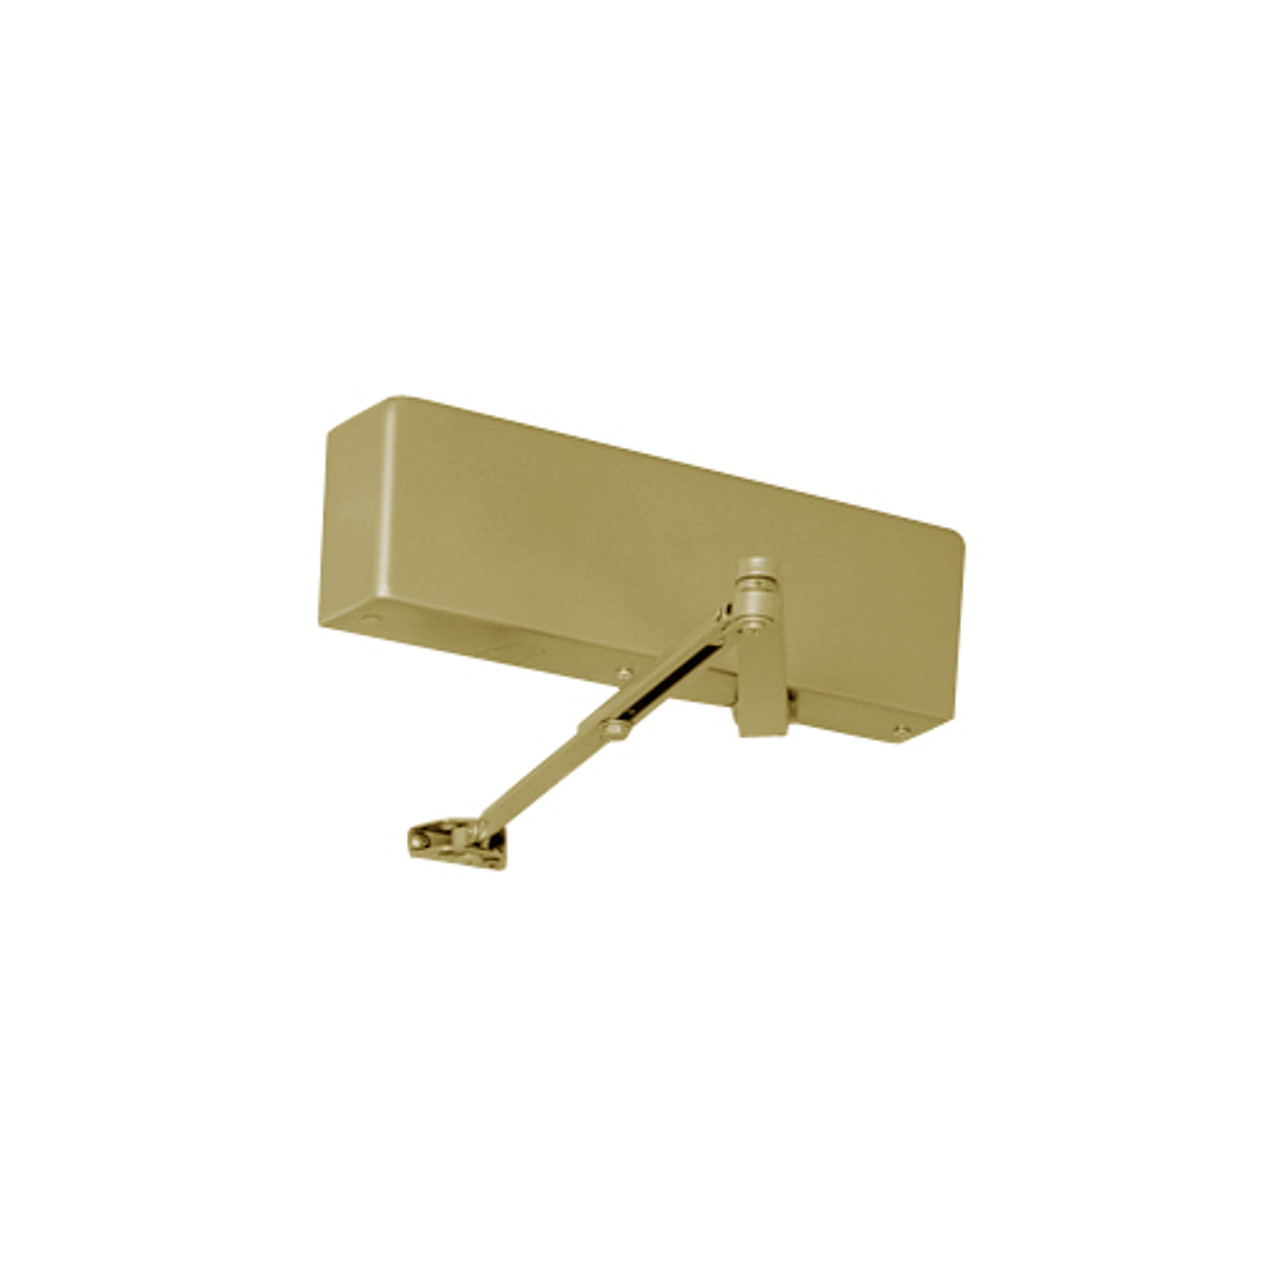 J7500HM-696 Norton 7500 Series Hold Open Institutional Door Closer with Top Jamb Only Reveals 2-3/4 to 6-3/4 inch to 150 Degree in Gold Finish